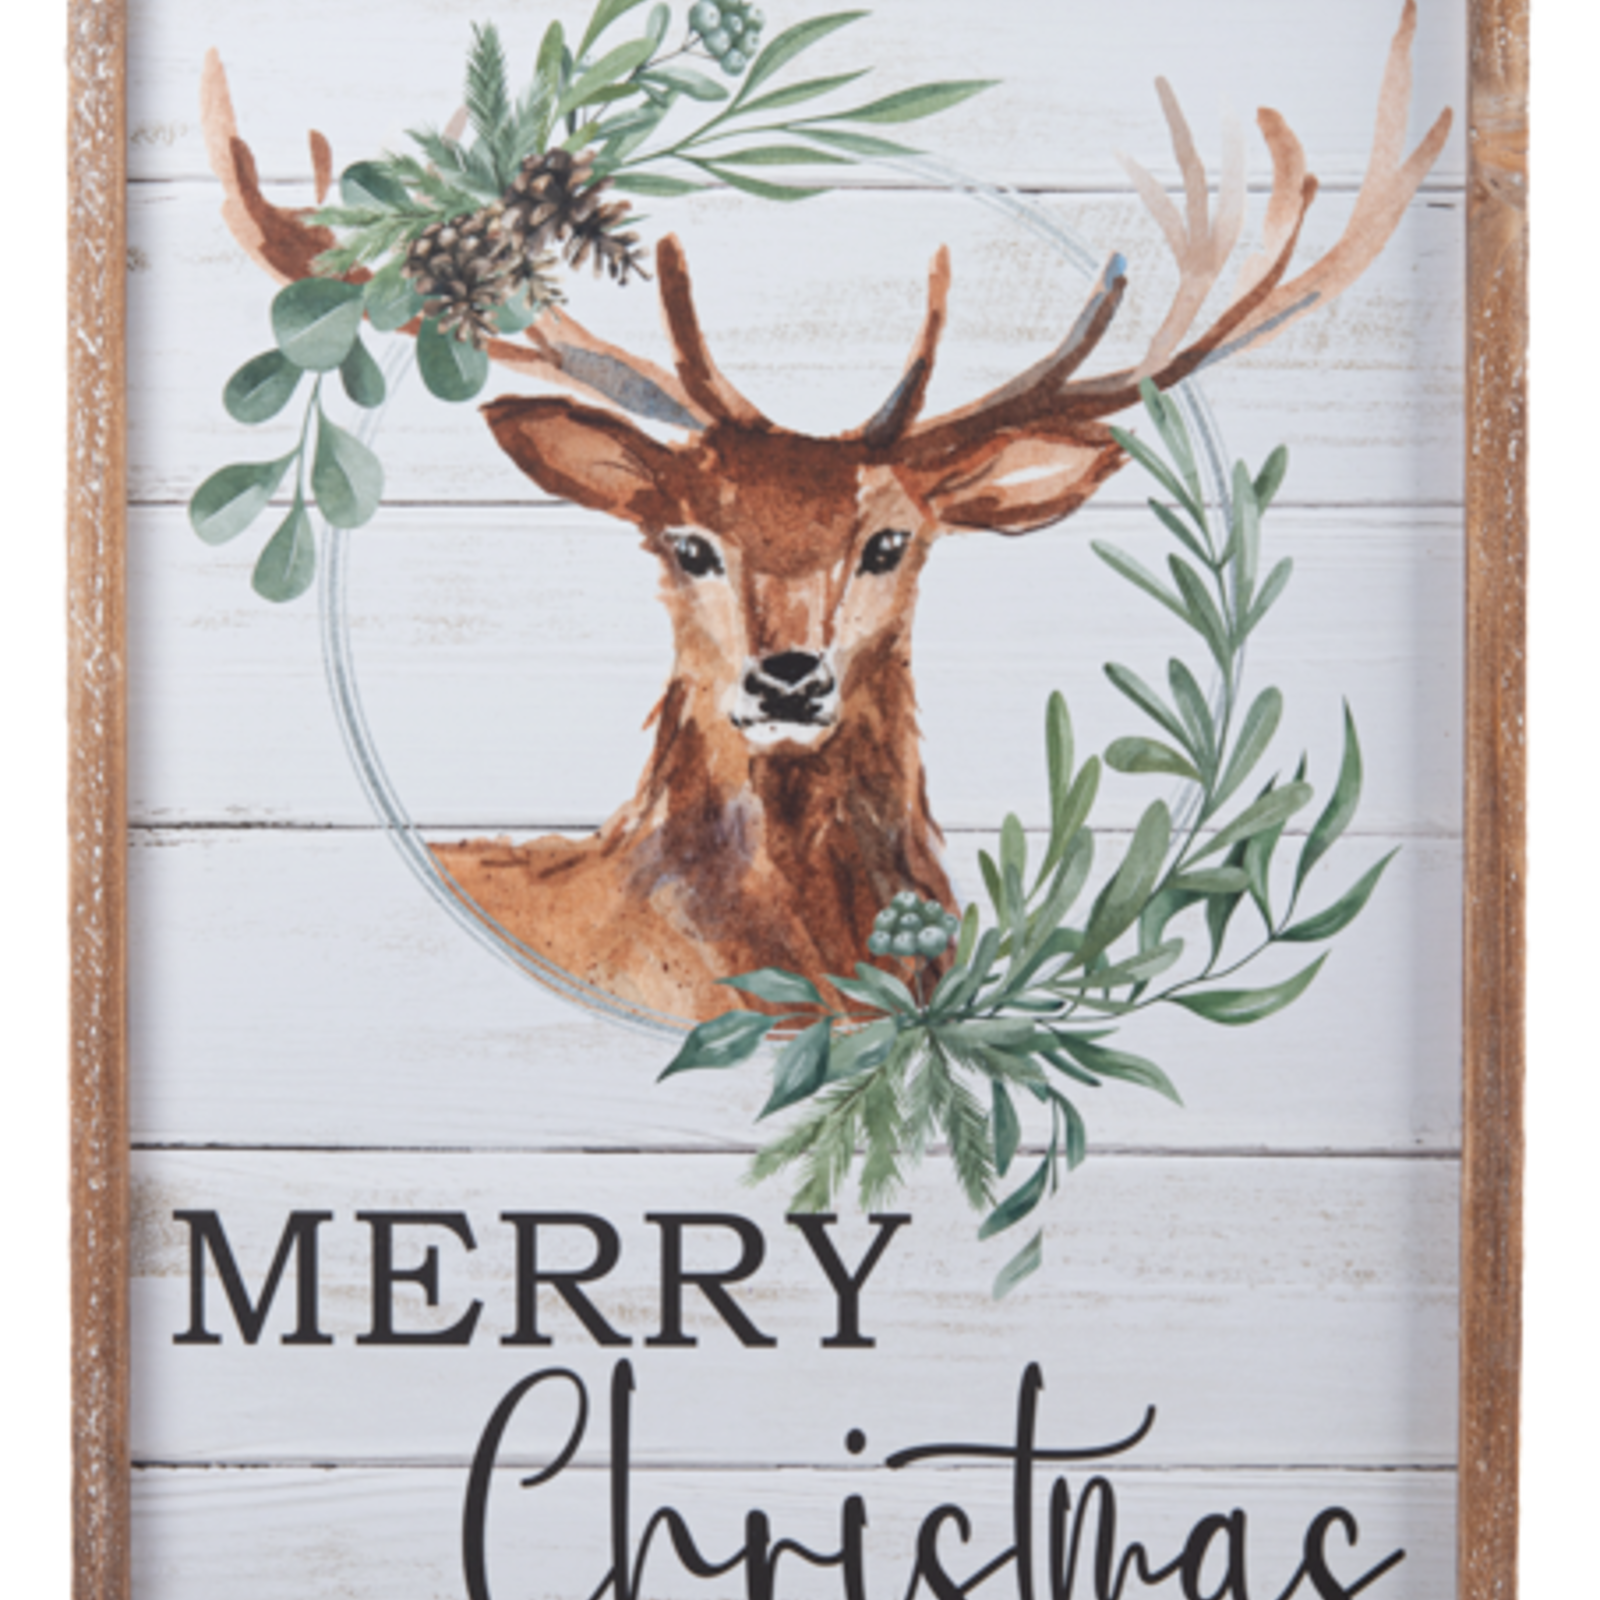 Ganz "Merry Christmas" Stag  Wall Decor   CX182755 loading=